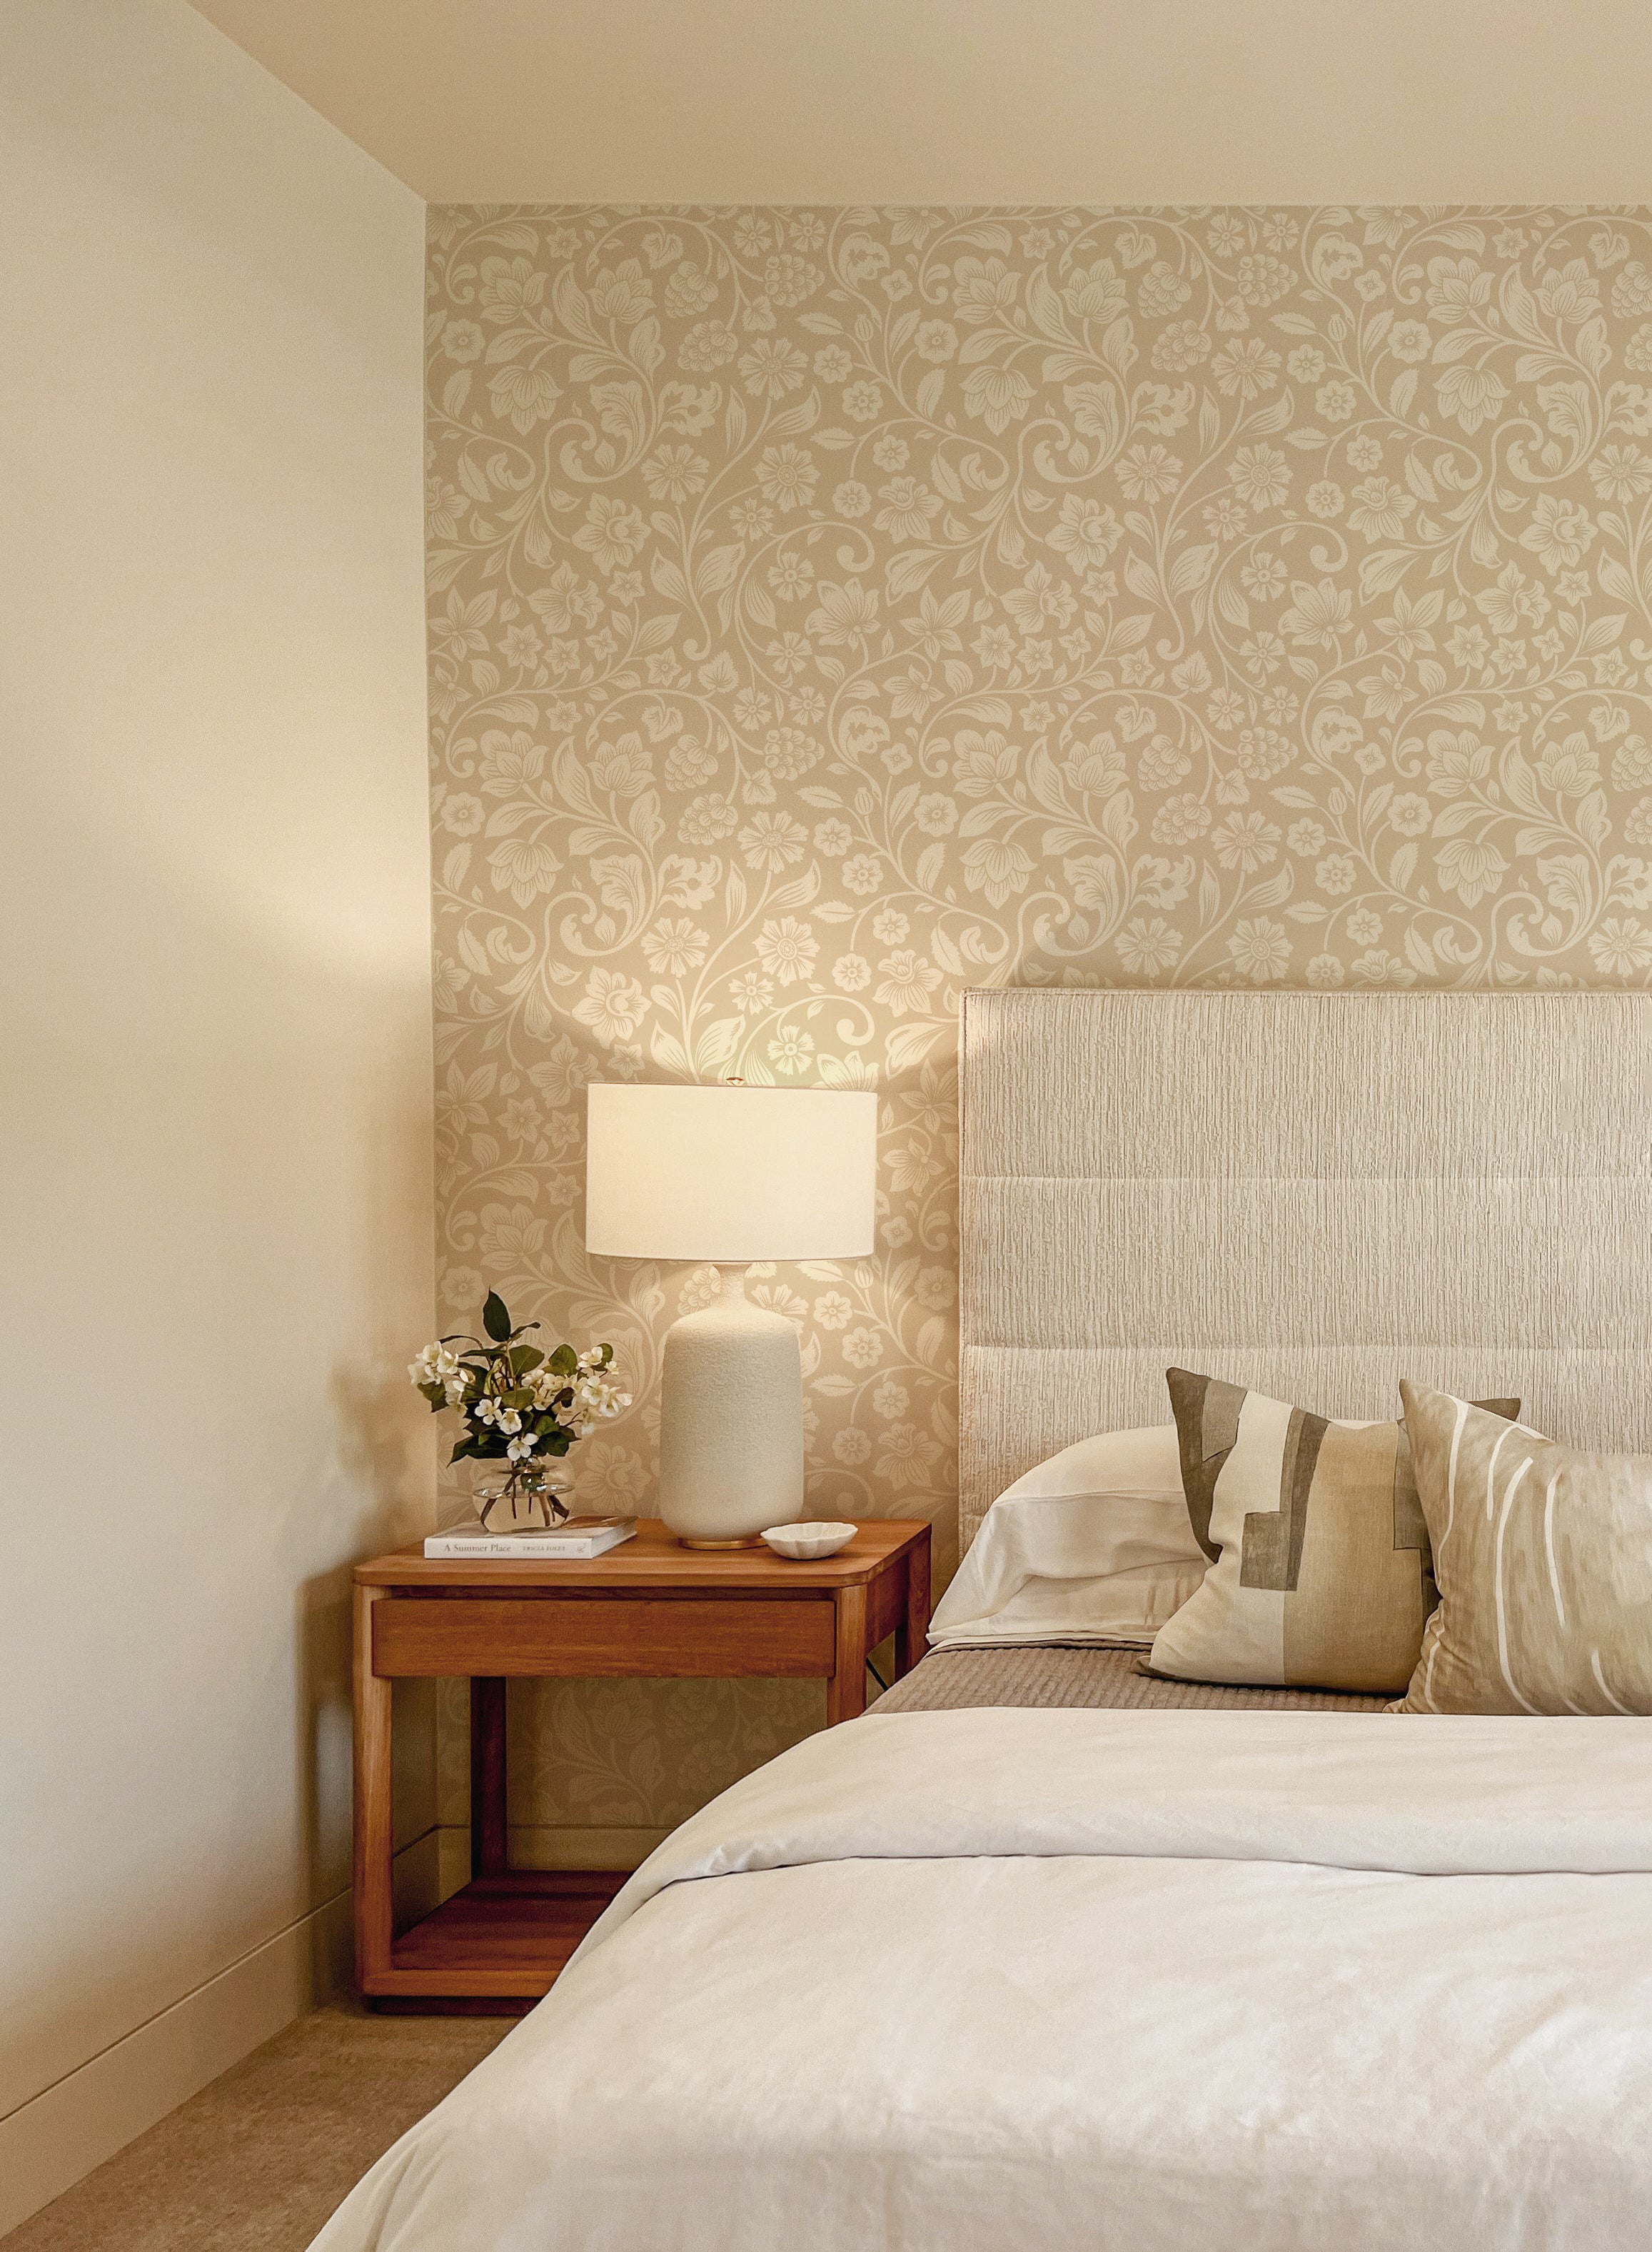 A bedroom wall covered in 'Vintage Floral Wallpaper' creates a warm and inviting ambiance, complementing the neutral bedding and wooden bedside table, with a white ceramic lamp adding to the room's serene decor.